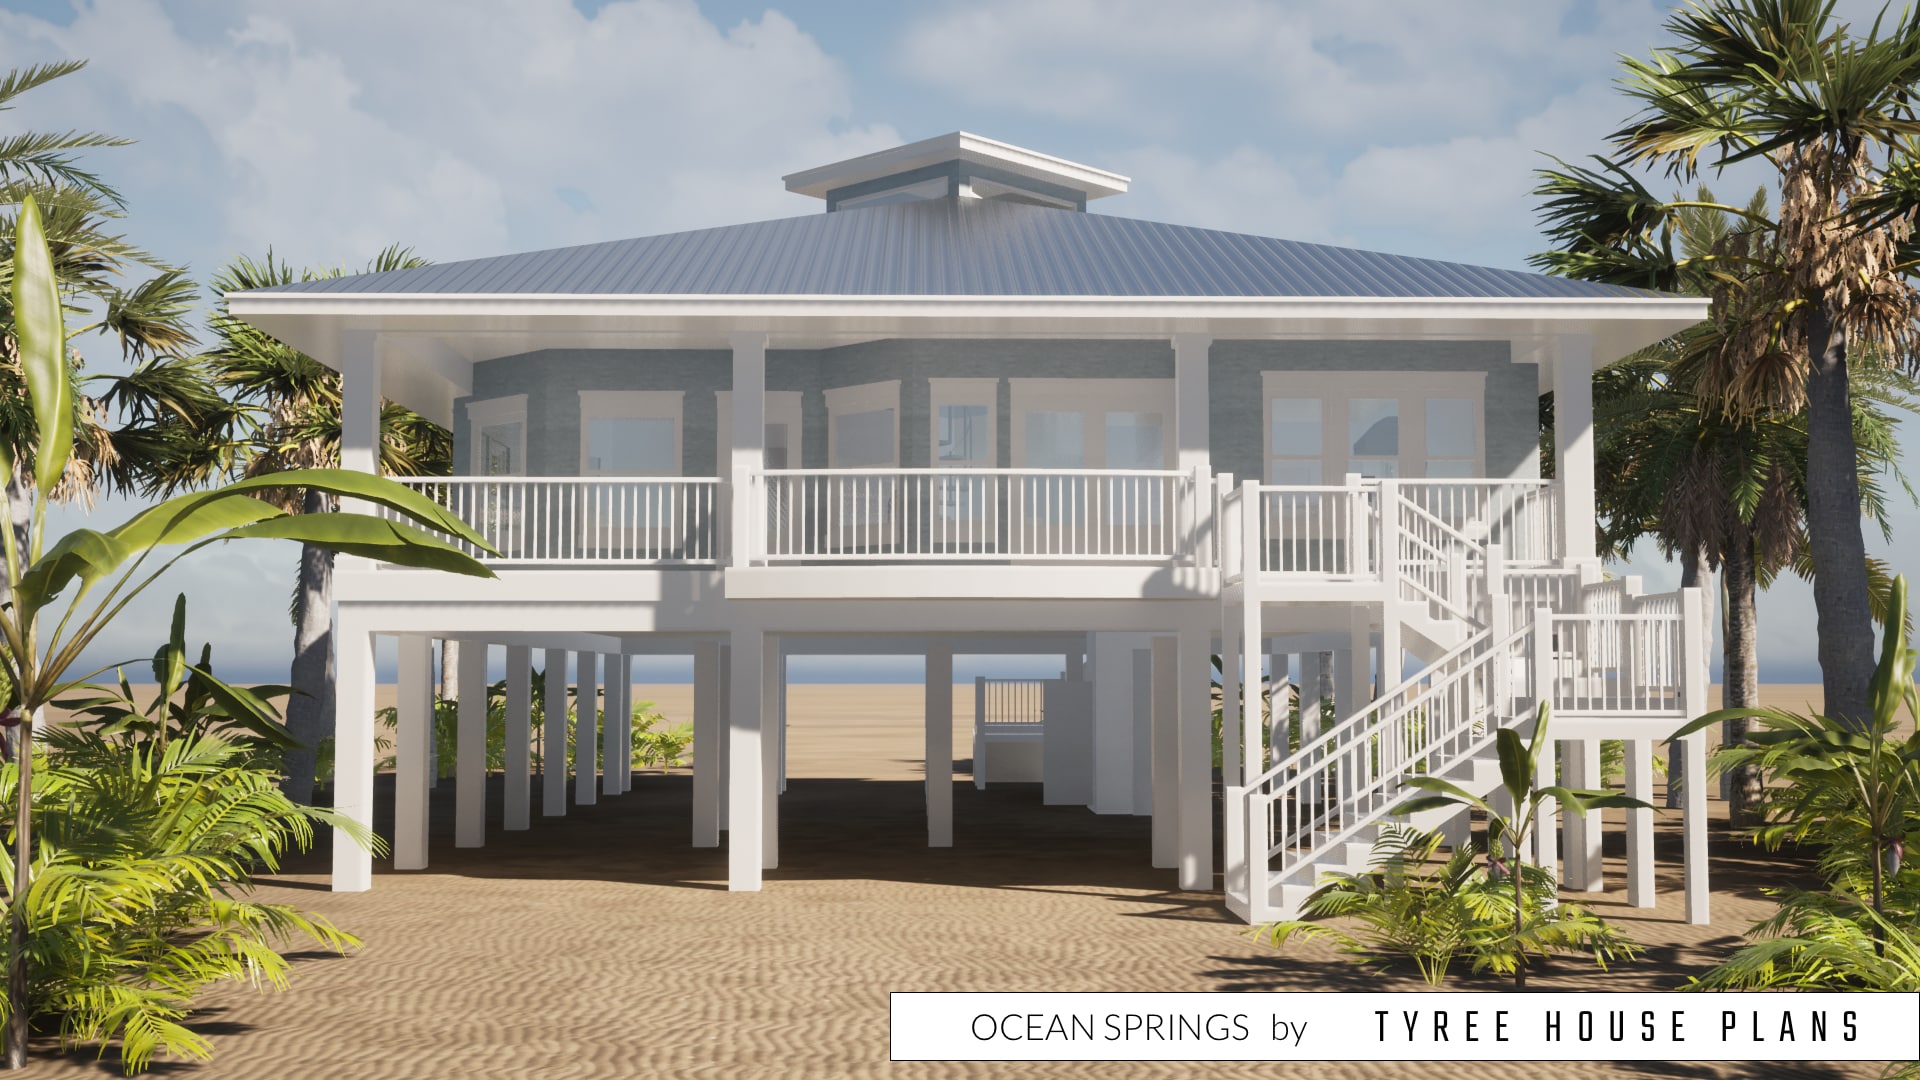 Rear porch. Ocean Springs by Tyree House Plans.